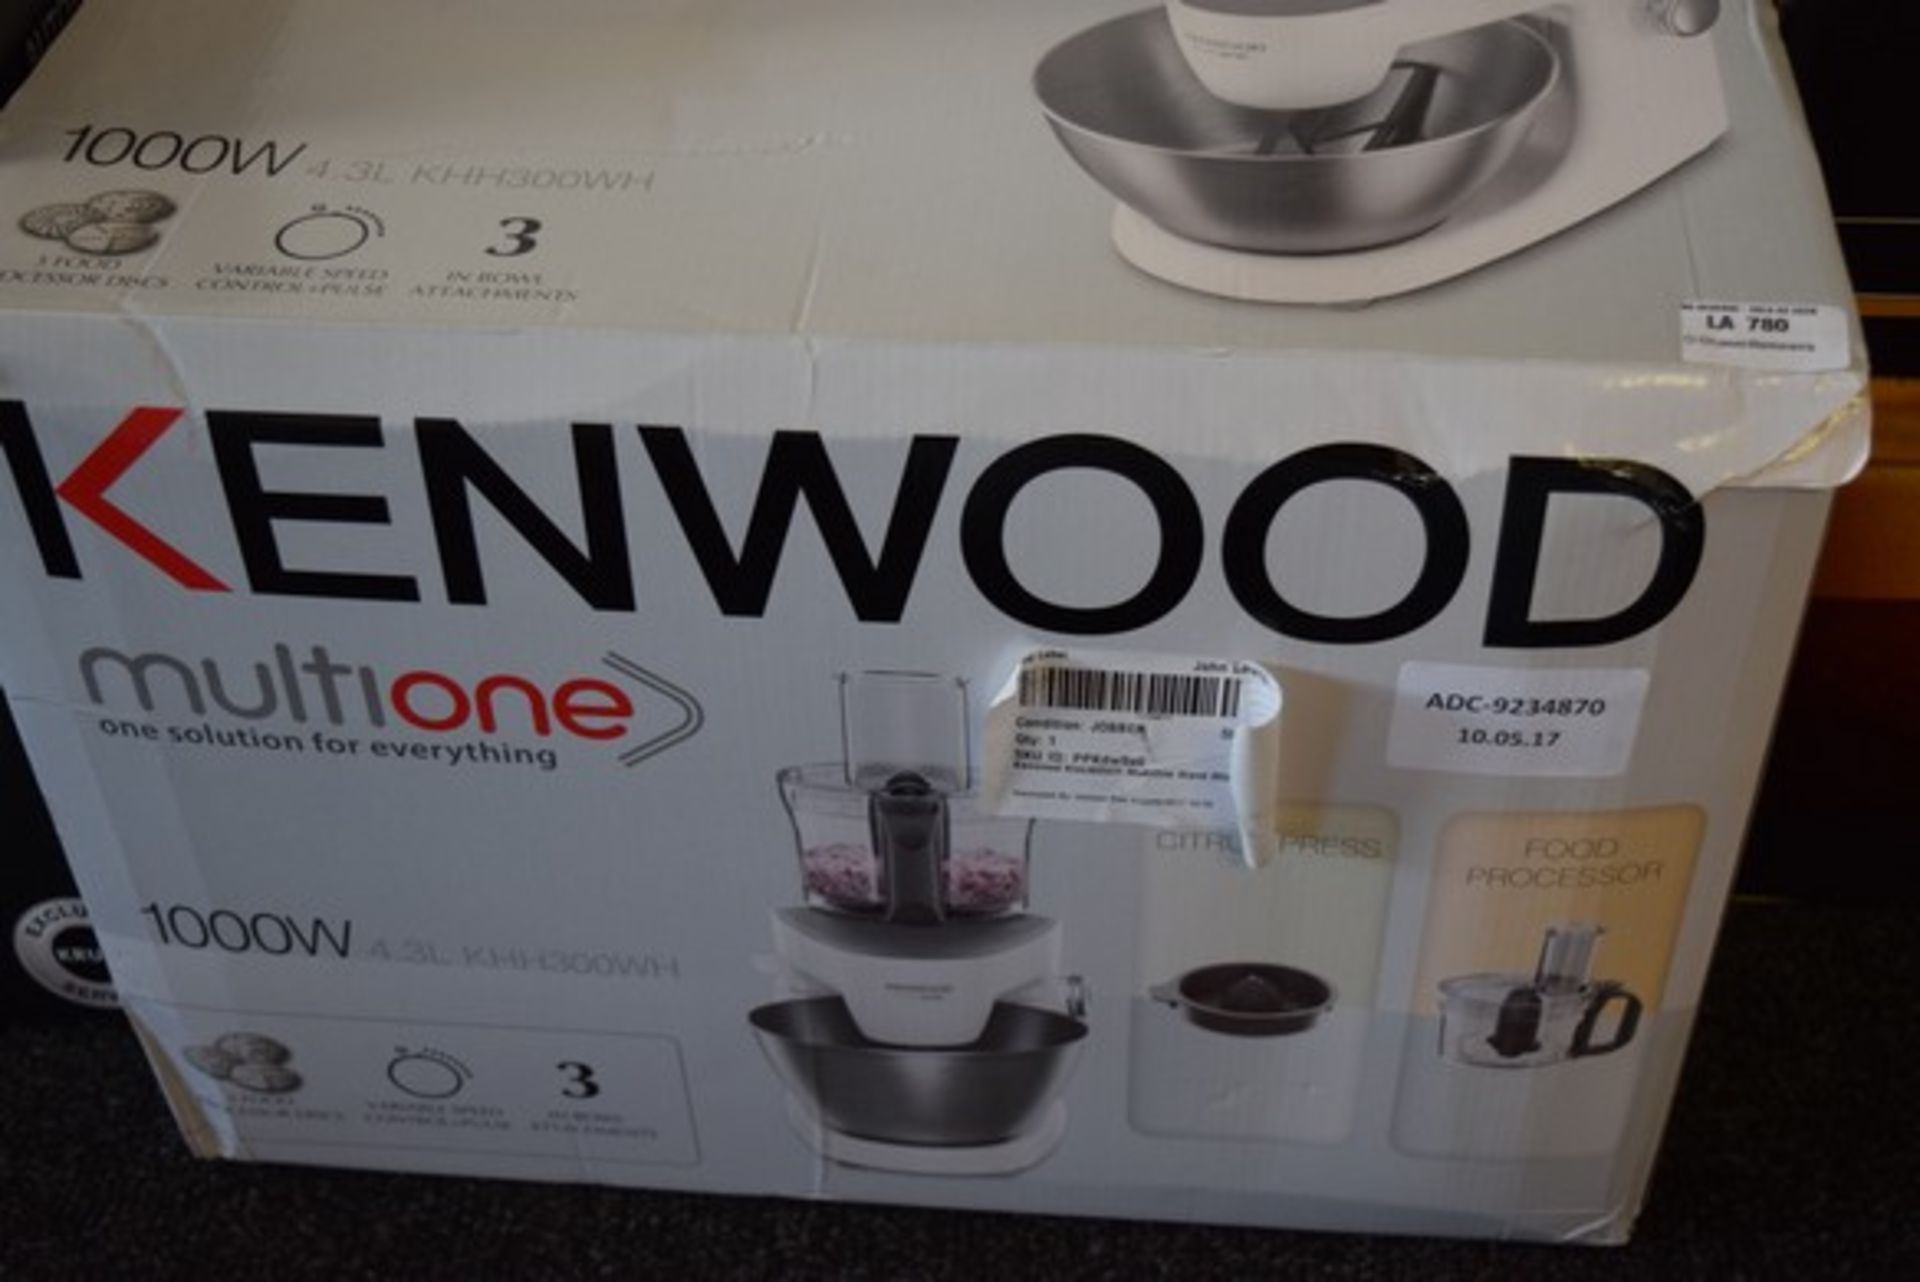 1 x BOXED KENWOOD MULTI 1 1000W STAND MIXER RRP £270 10.05.17 *PLEASE NOTE THAT THE BID PRICE IS